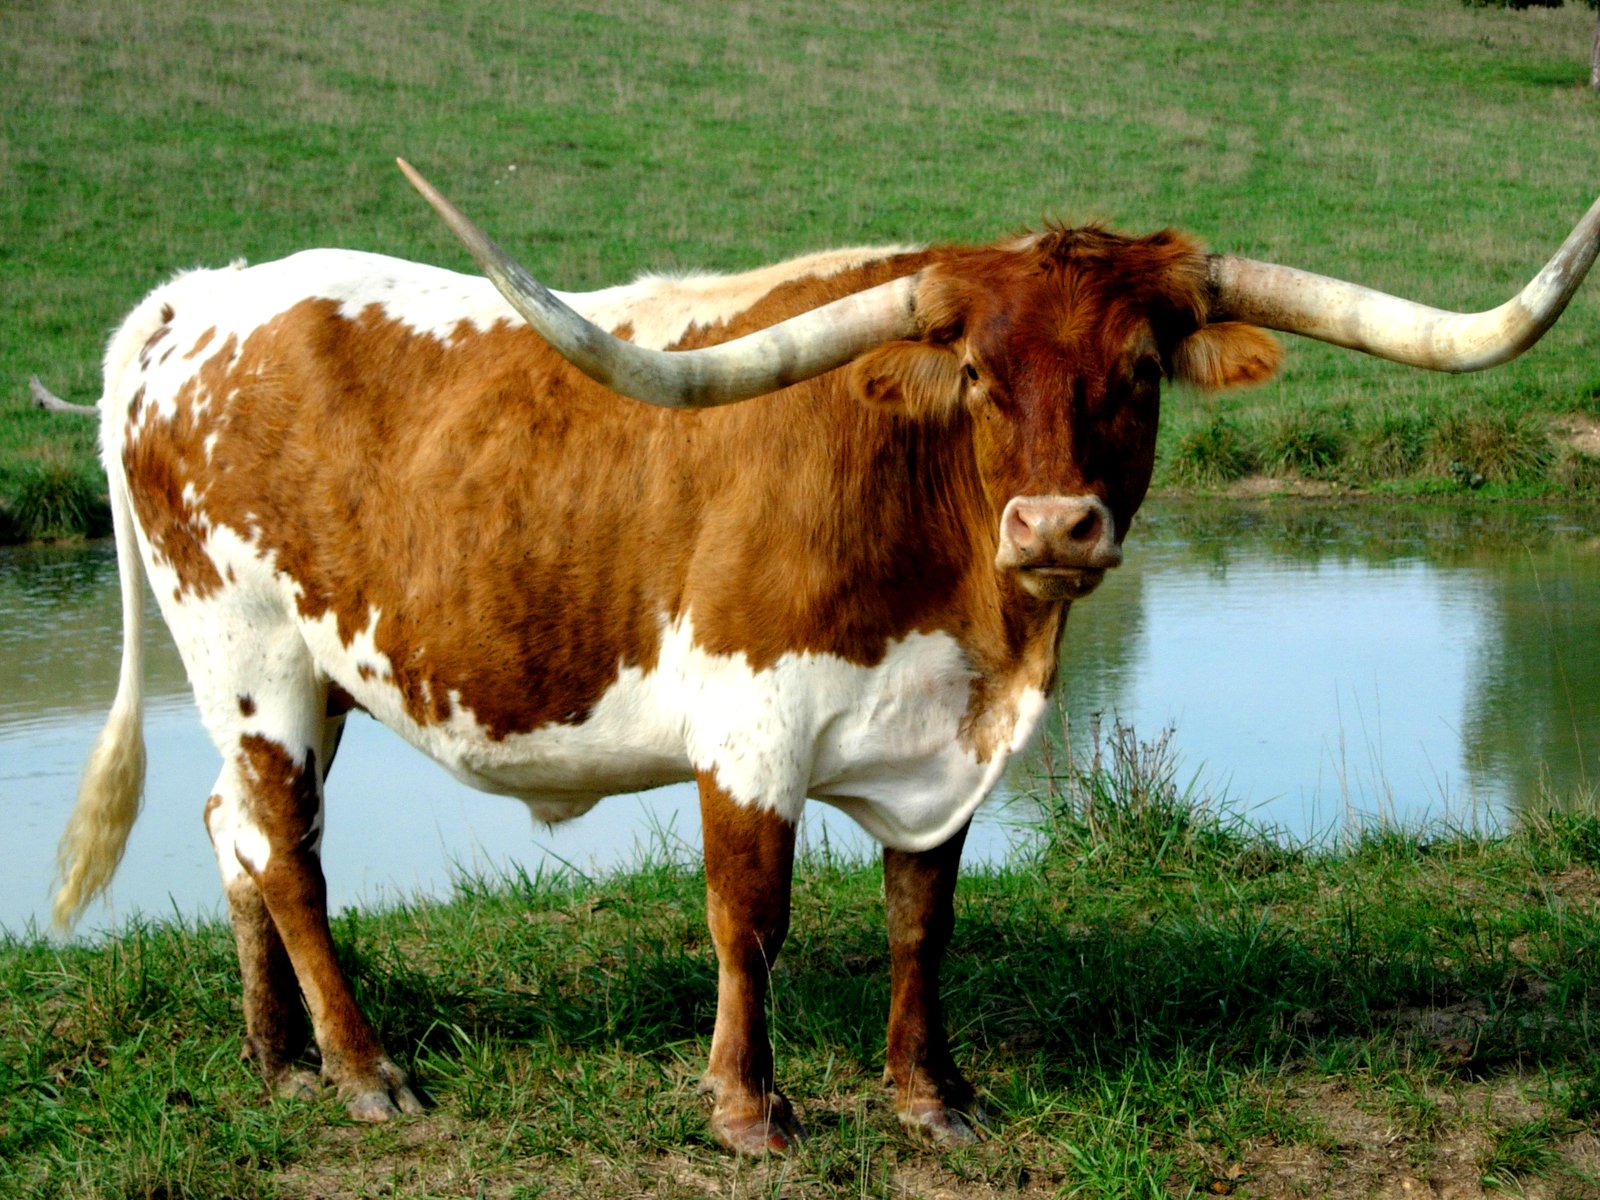 a brown and white cow standing in the grass next to water